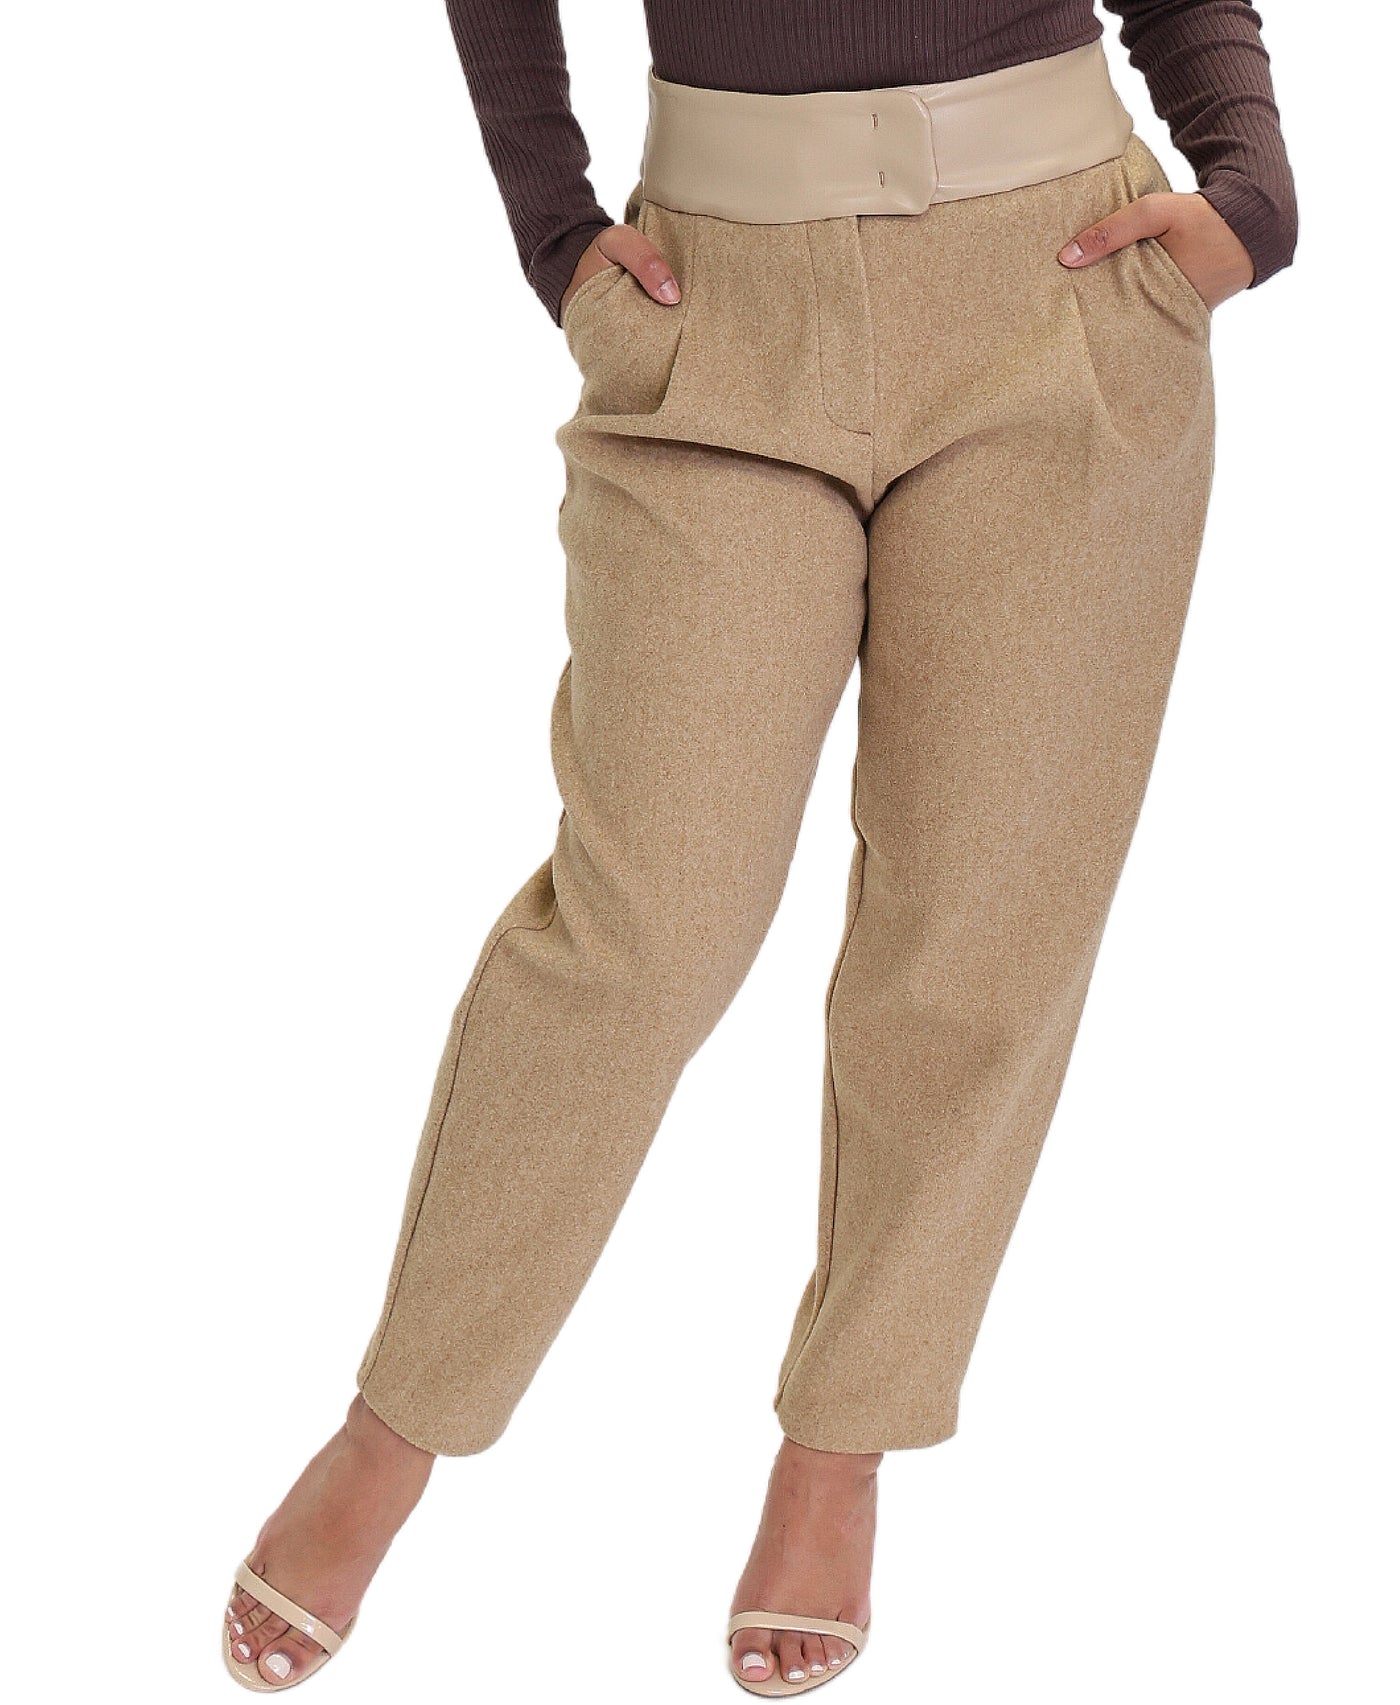 Wool Pants w/ Faux Leather Waistband image 1